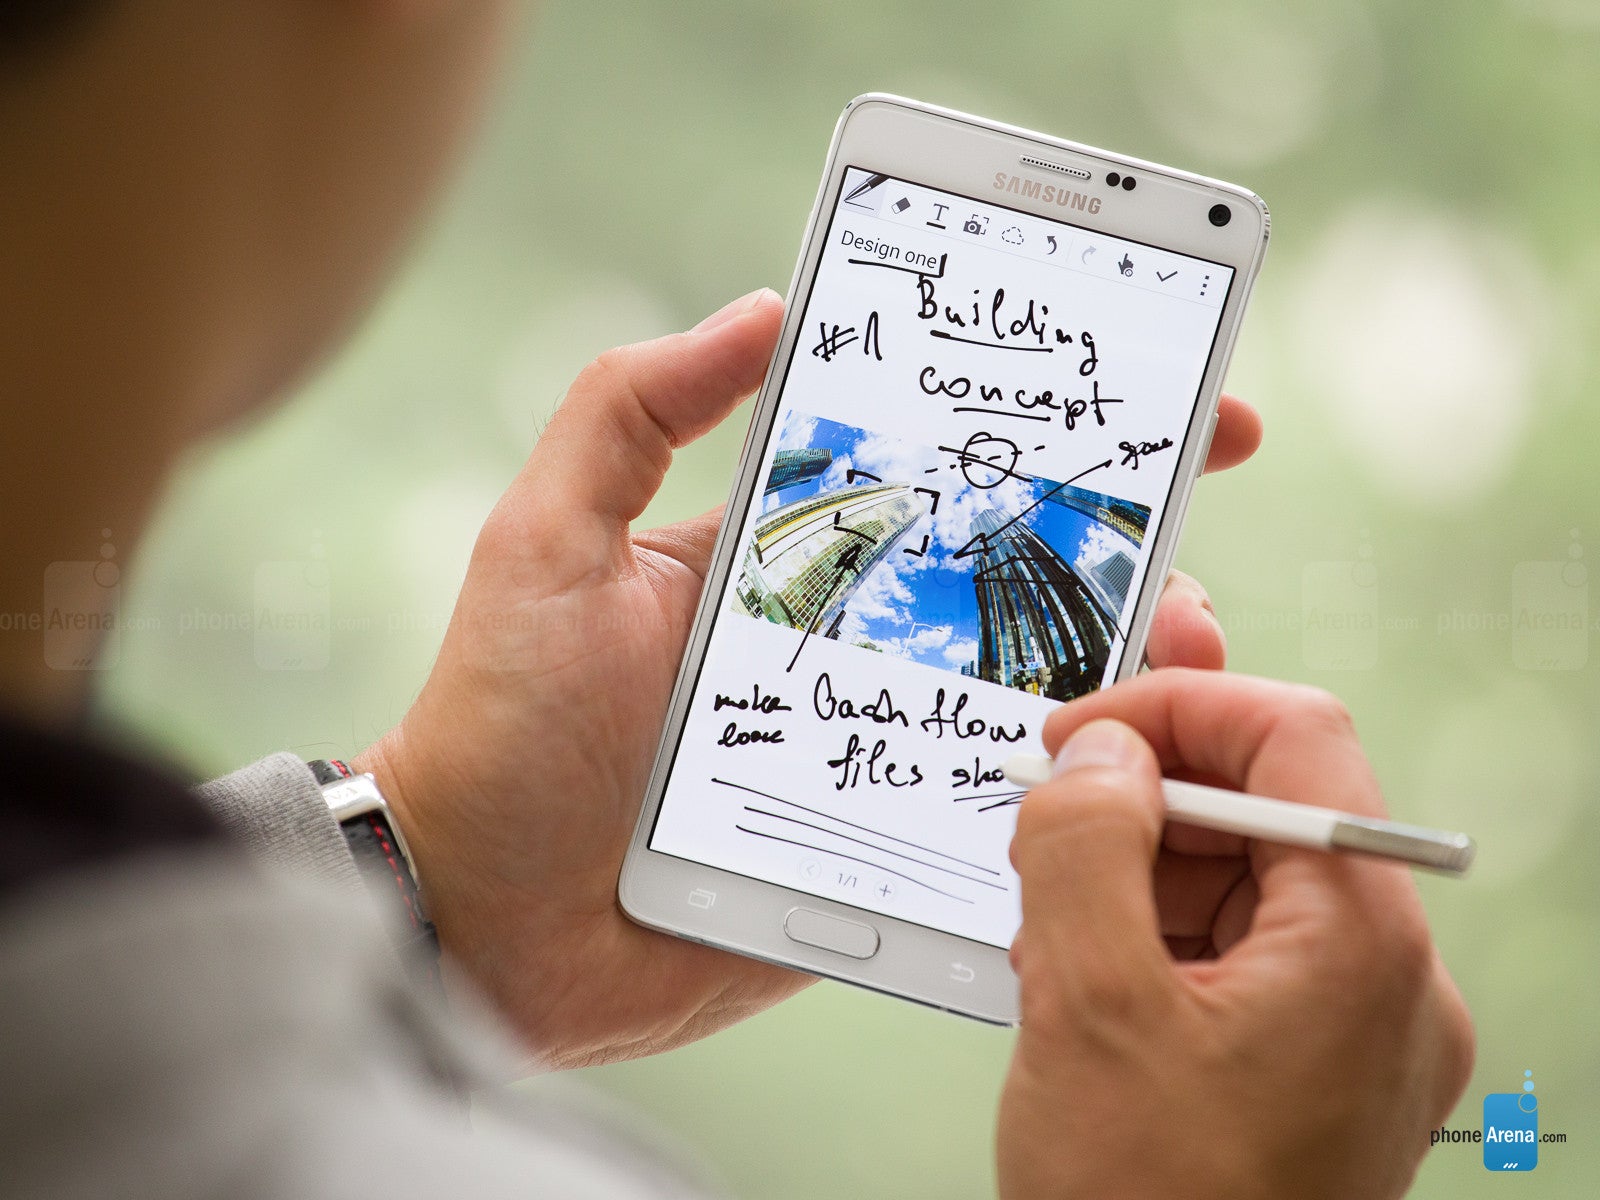 Double pressure: how the S Pen stylus of the Note 4 works